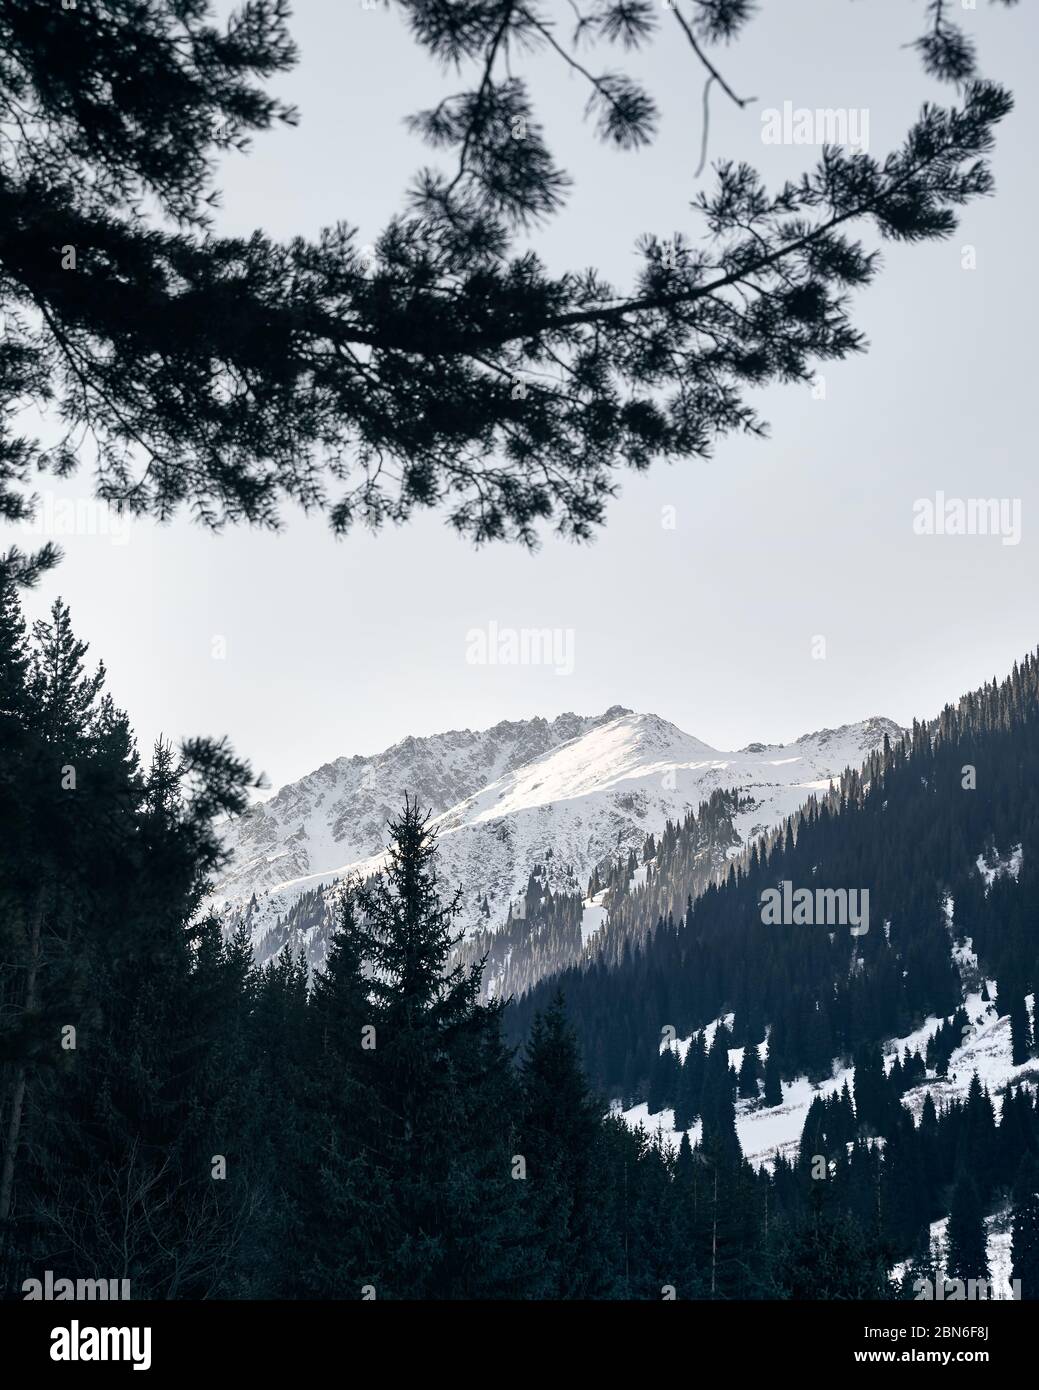 Fir tree forest and mountains with snow at winter time in Kazakhstan Stock Photo